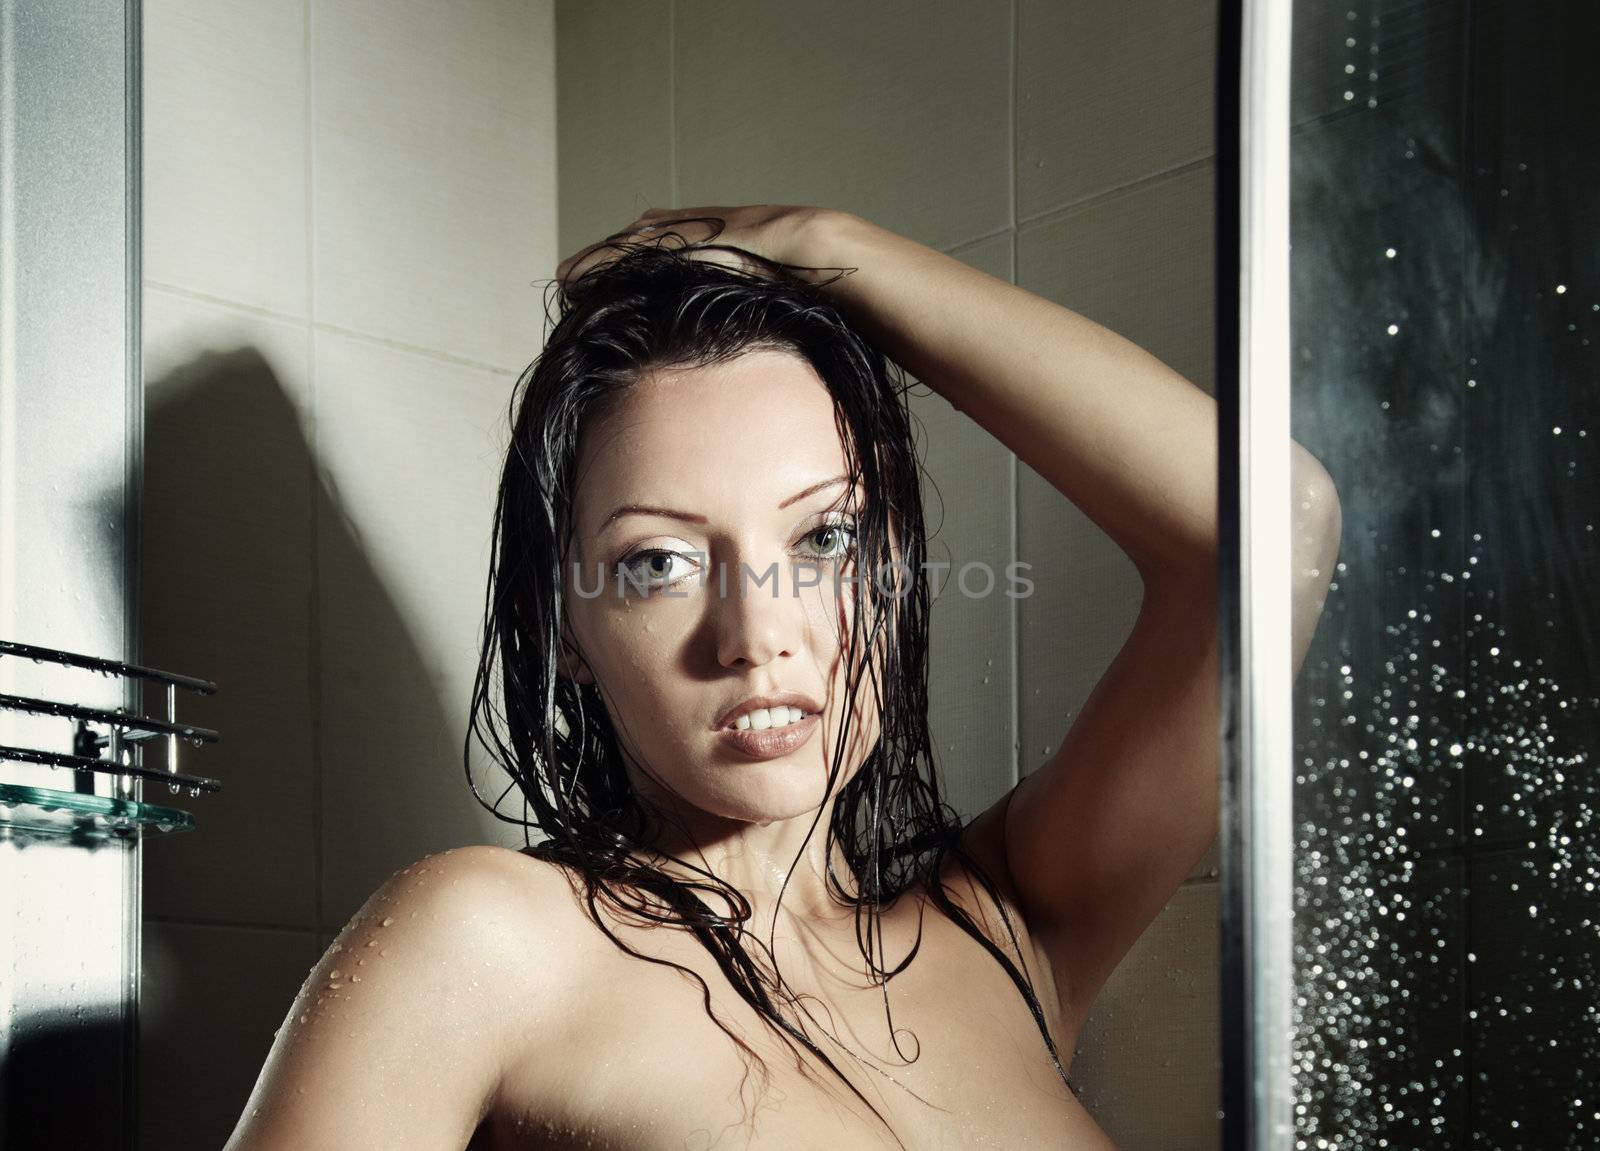 Sensual wet woman in the bathroom after washing